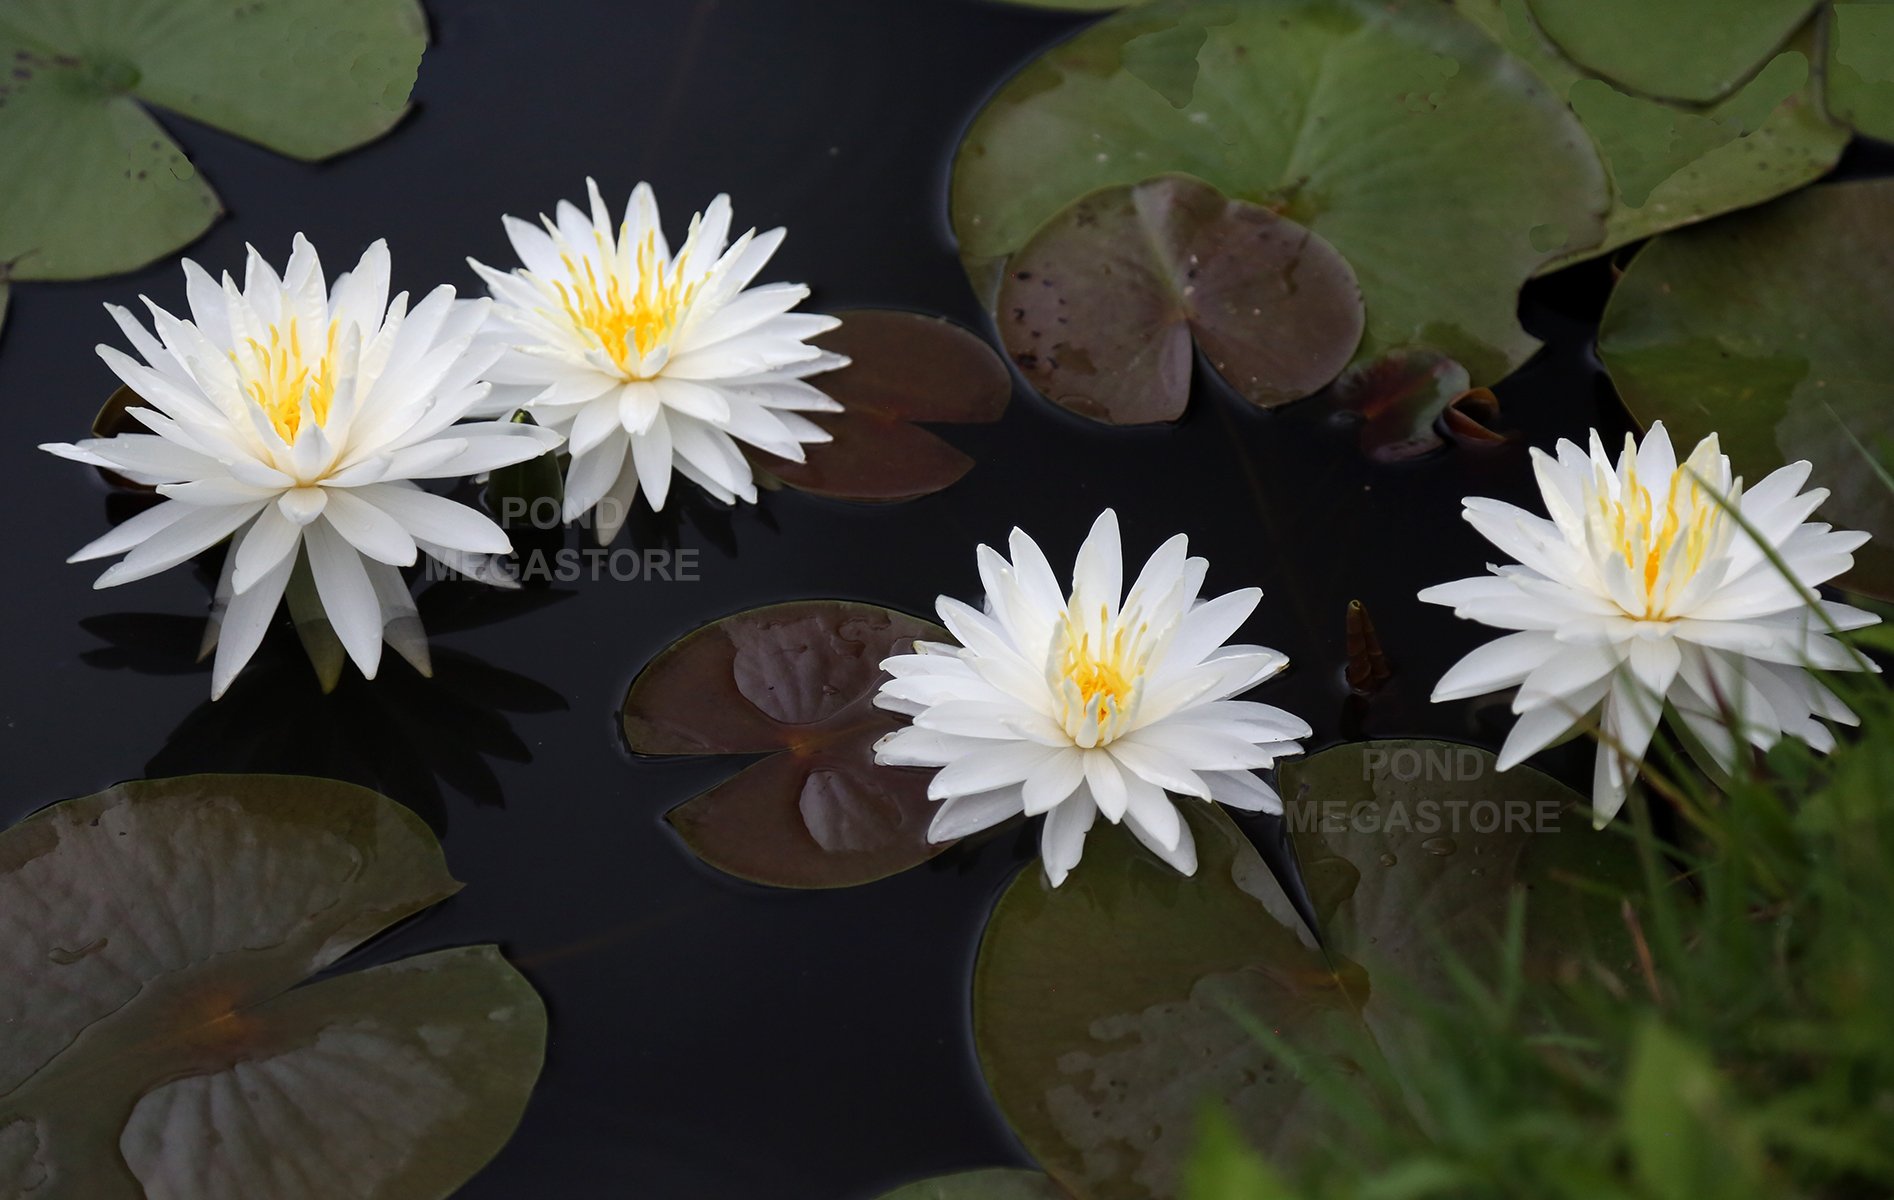 Water lily. 